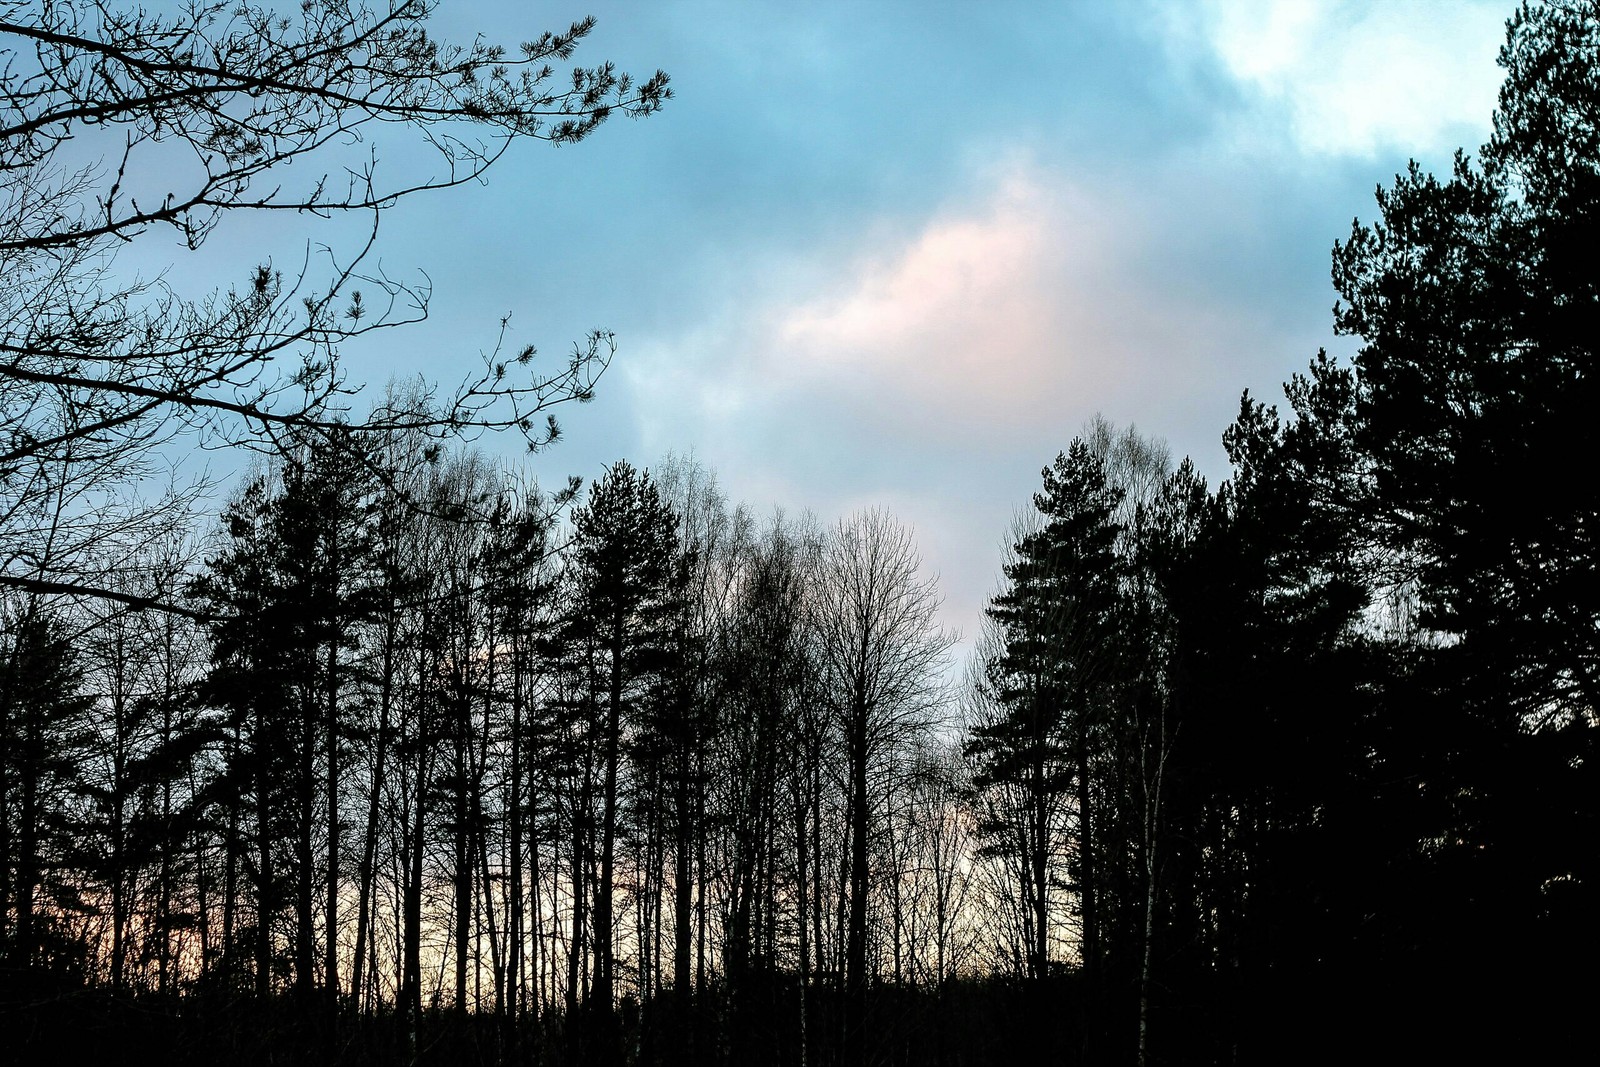 Pskov. - My, Forest, January, The photo, Nature, Canon 1100d, 50mm, Longpost